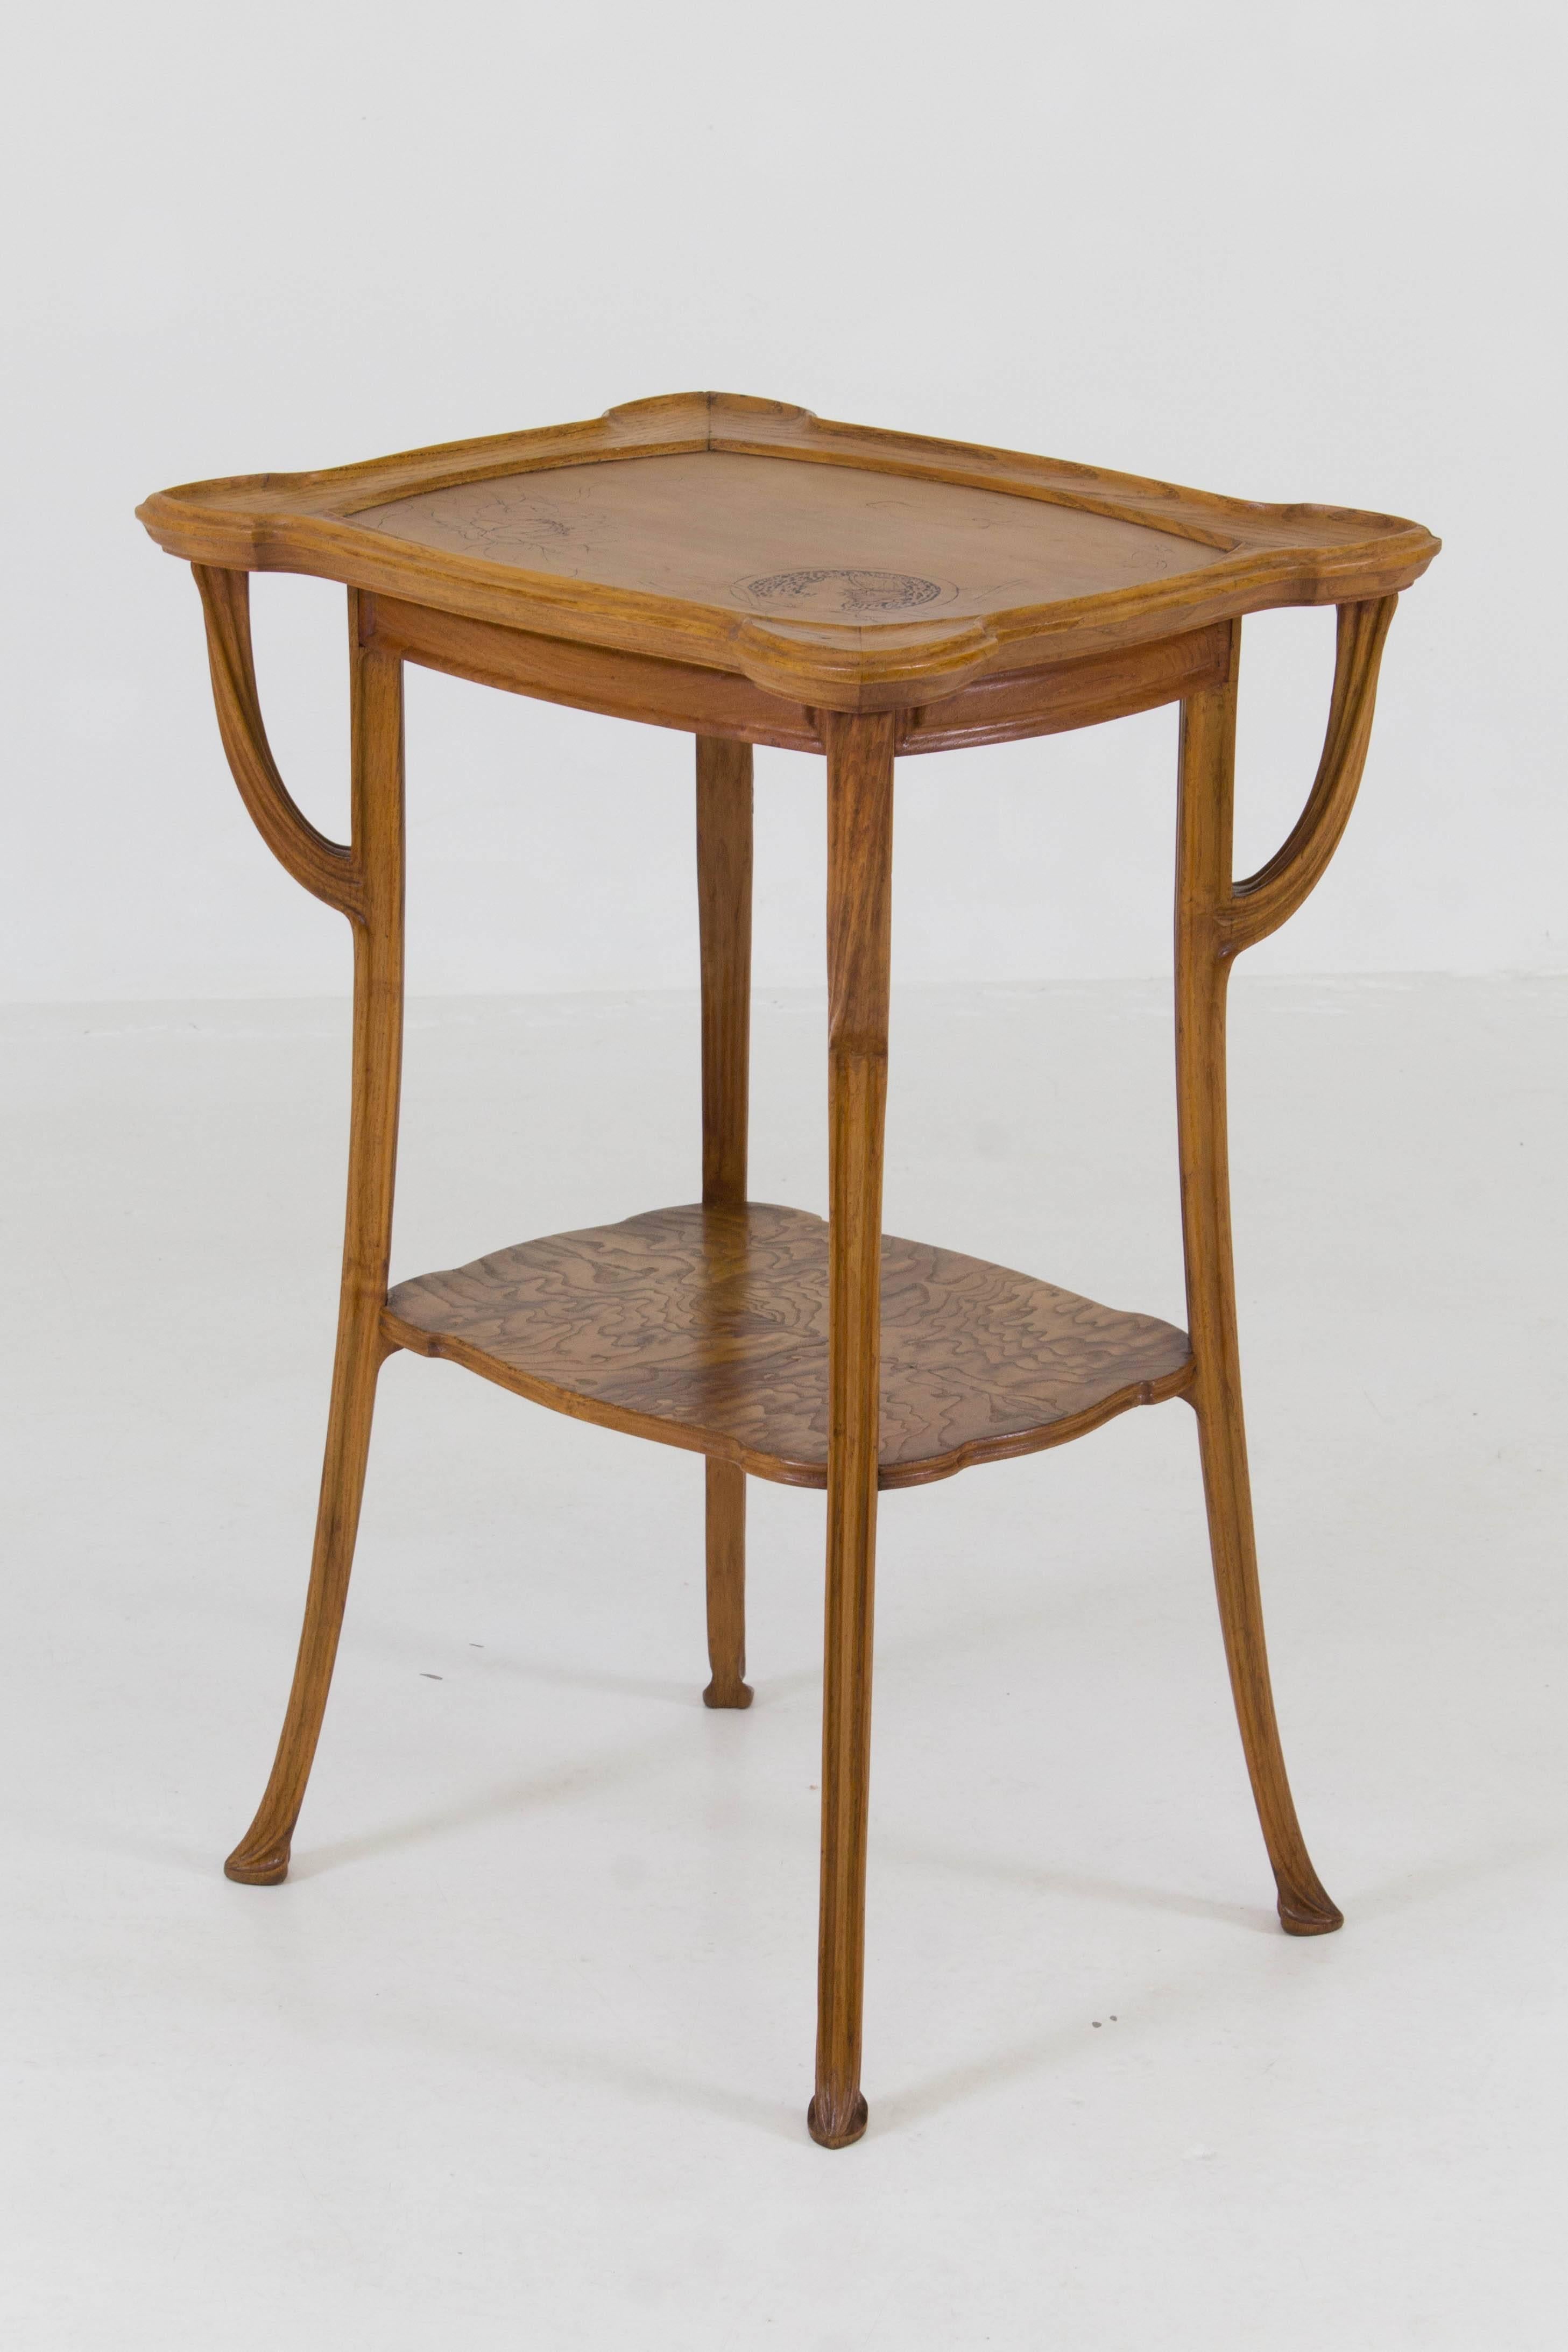 French Art Nouveau inlaid gueridon table, 1900s.
In the style of Emile Gallé.
Fruitwood with squared tapered legs.
In very good condition with minor wear consistent with age and use,
preserving a beautiful patina.